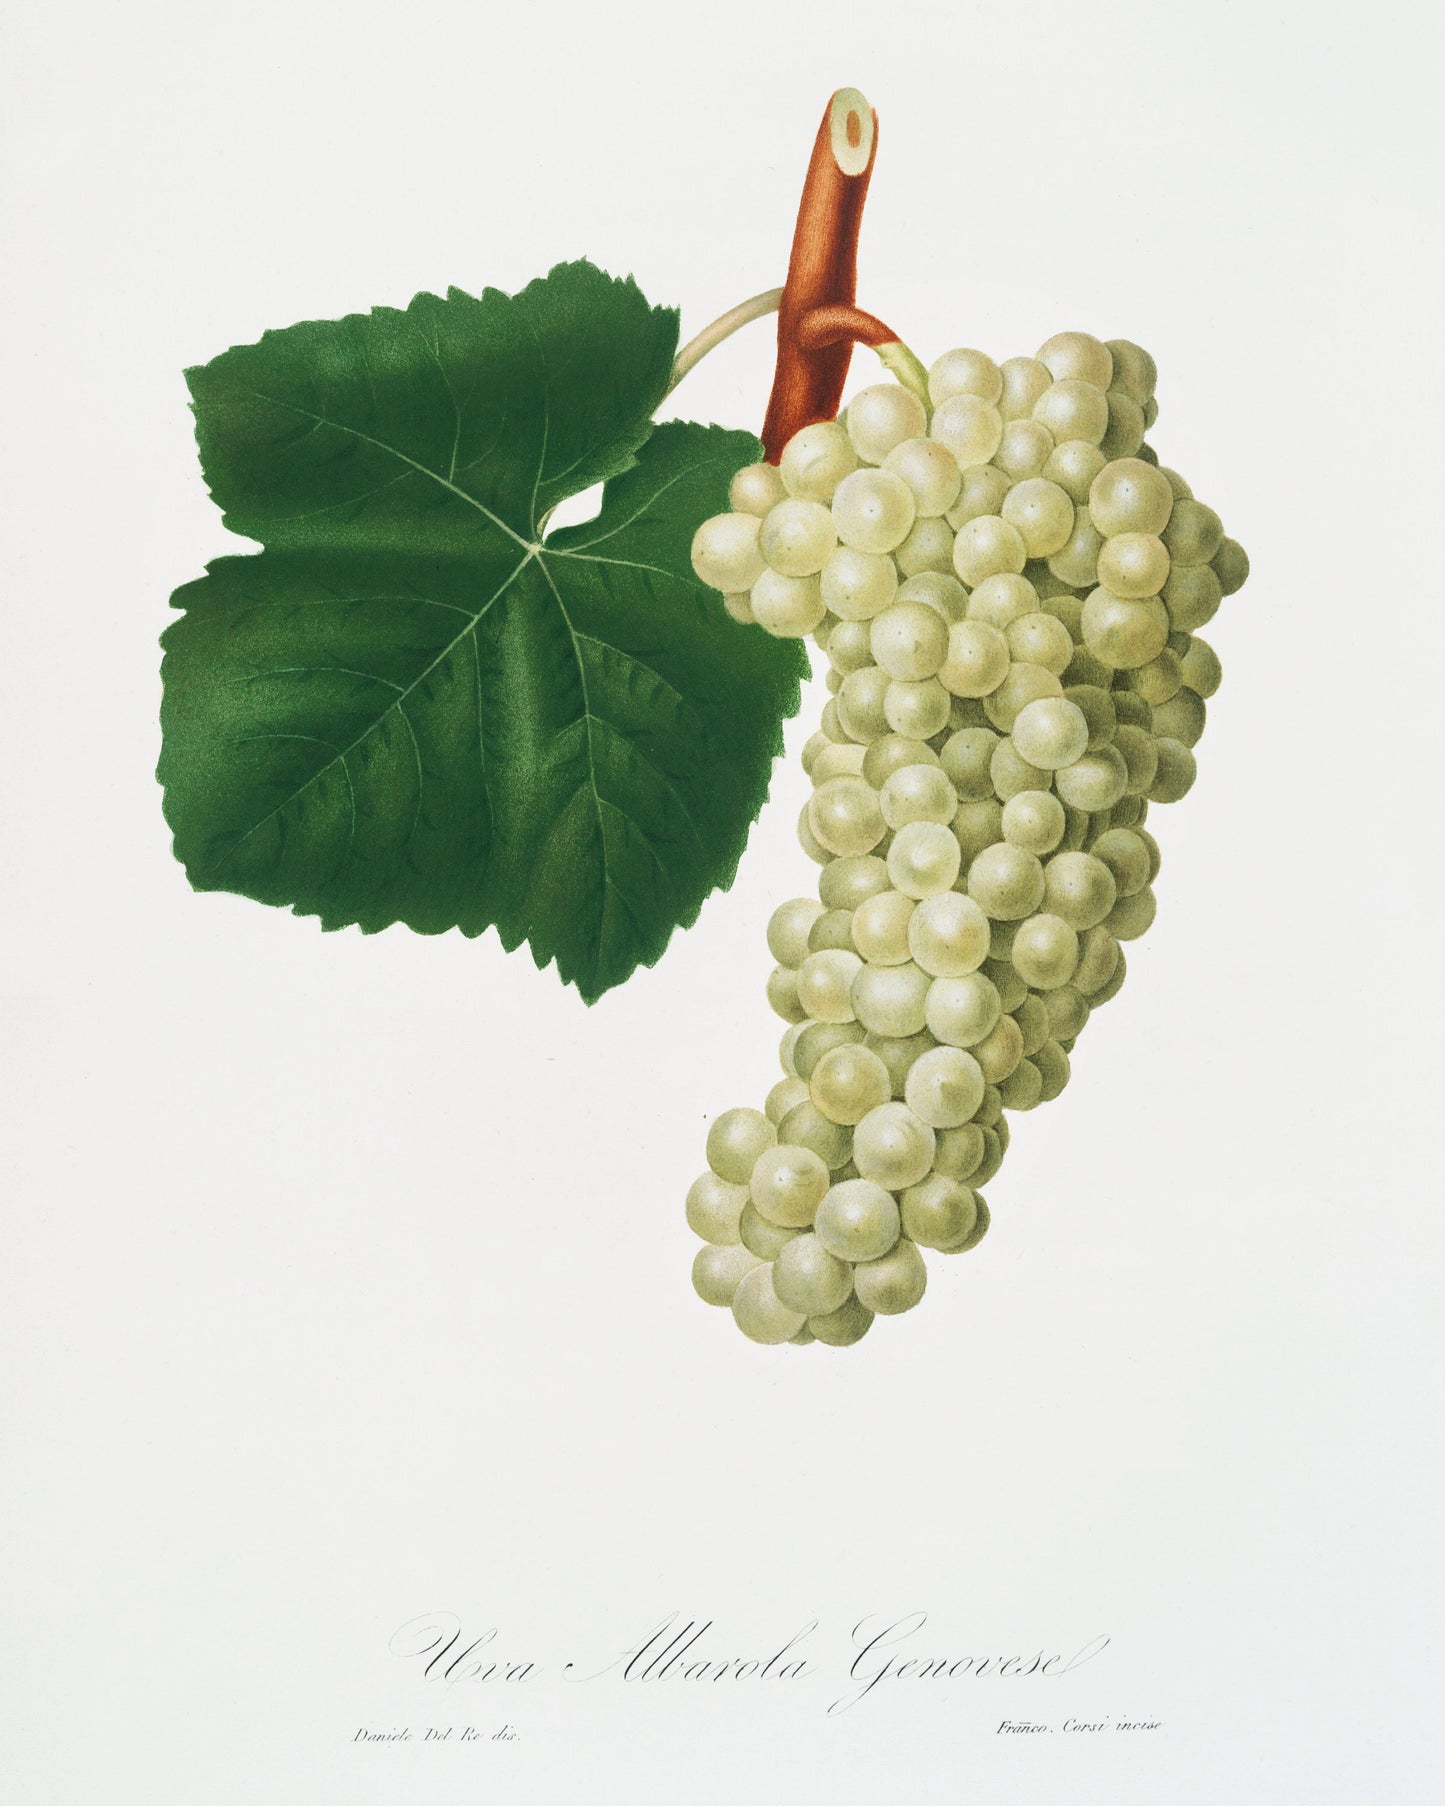 Vintage White Grape Illustration Poster Print Wall Hanging Decor A4 A3 A2